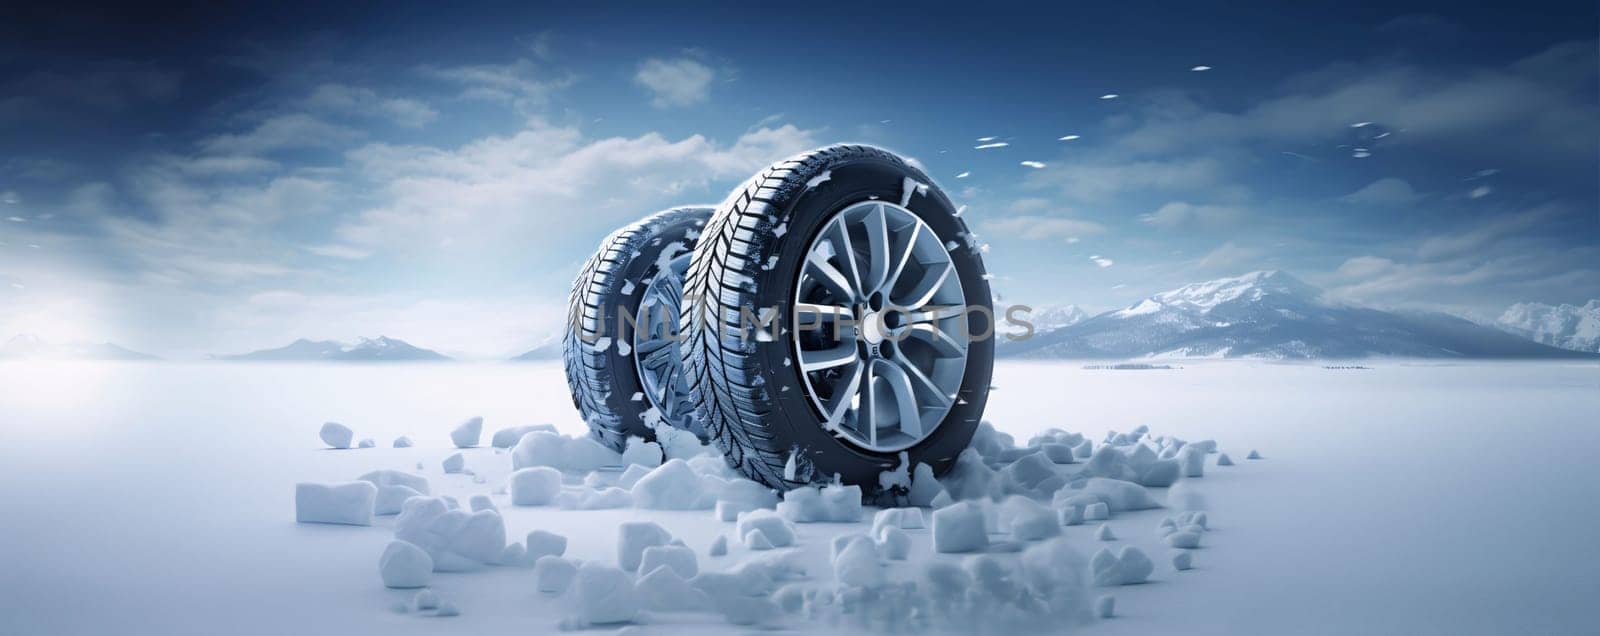 Car wheels against snowy landscape with snowdrift 3d-illustration by ThemesS